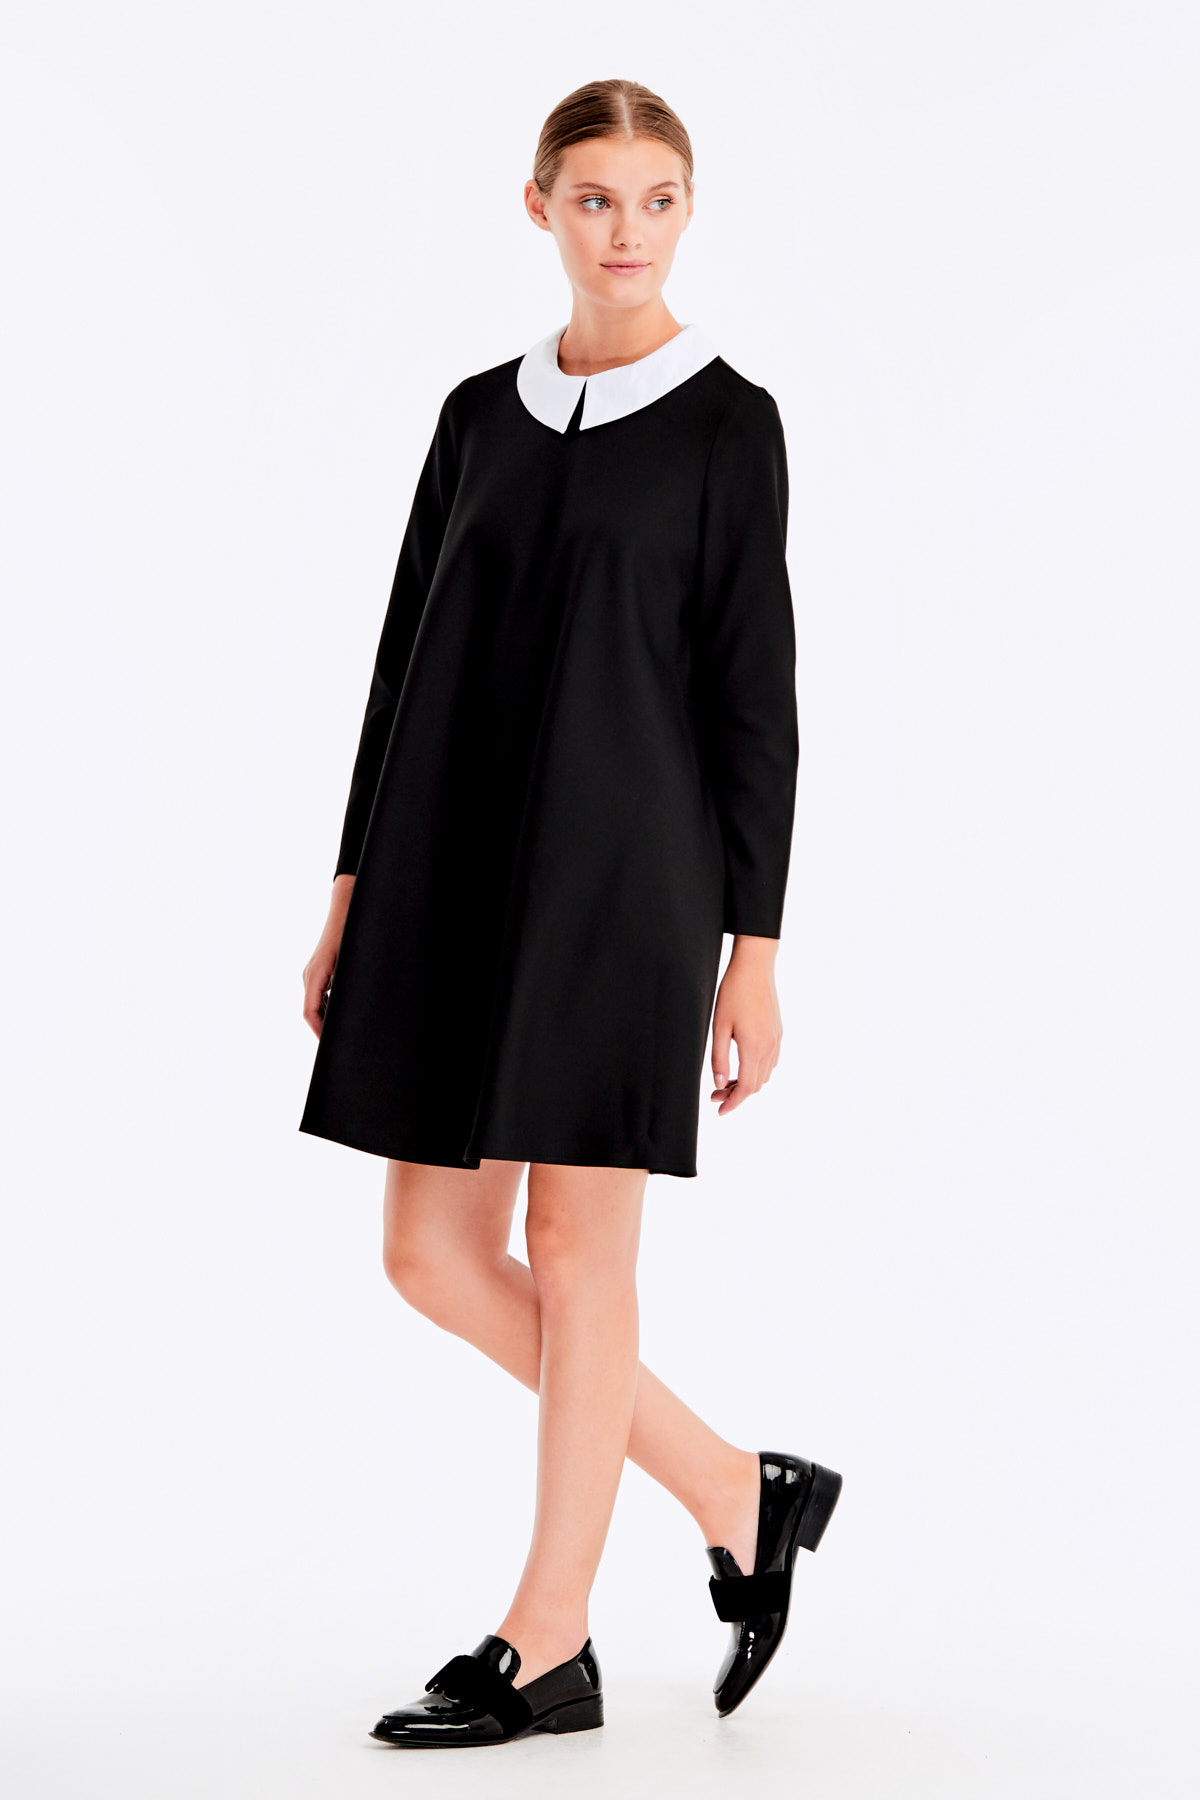 Loose-fitting black dress with a white collar , photo 6